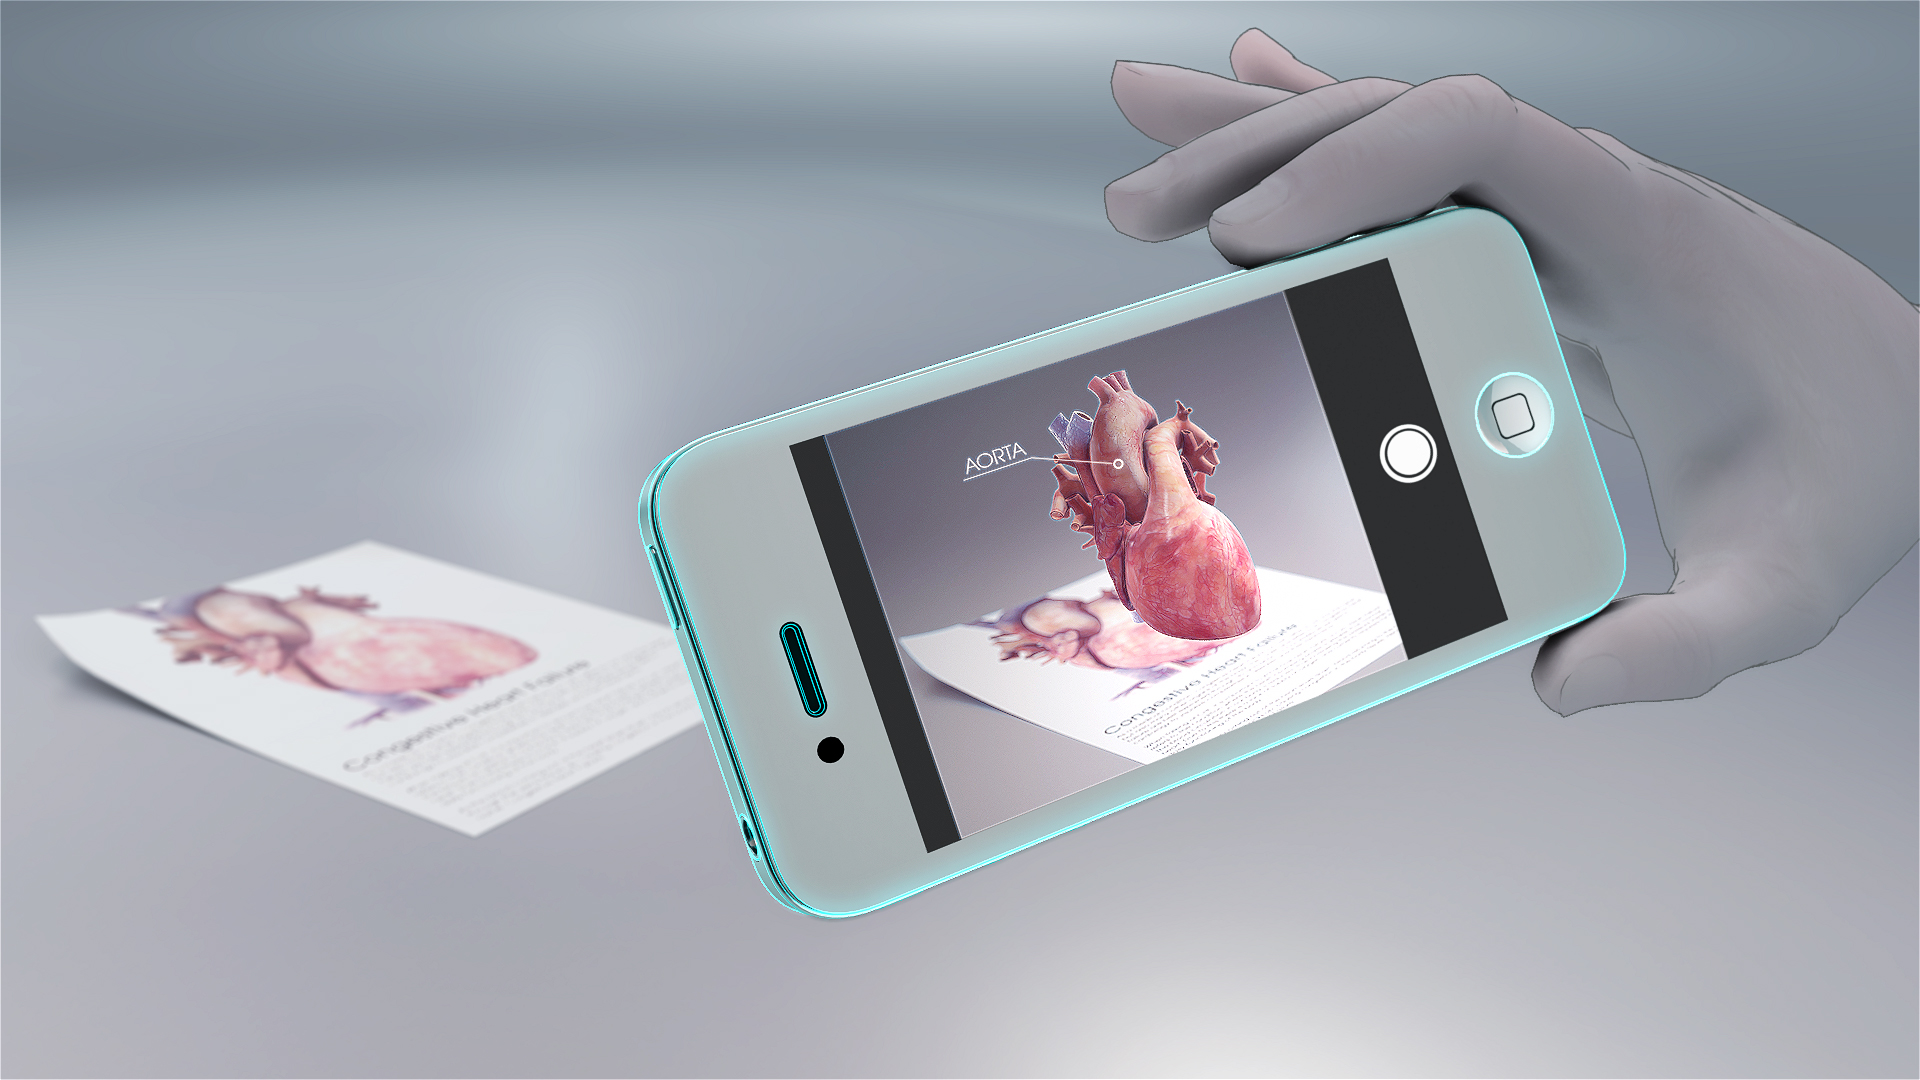 Apple is making Augmented Reality more accessible. Here’s how it is transforming Healthcare